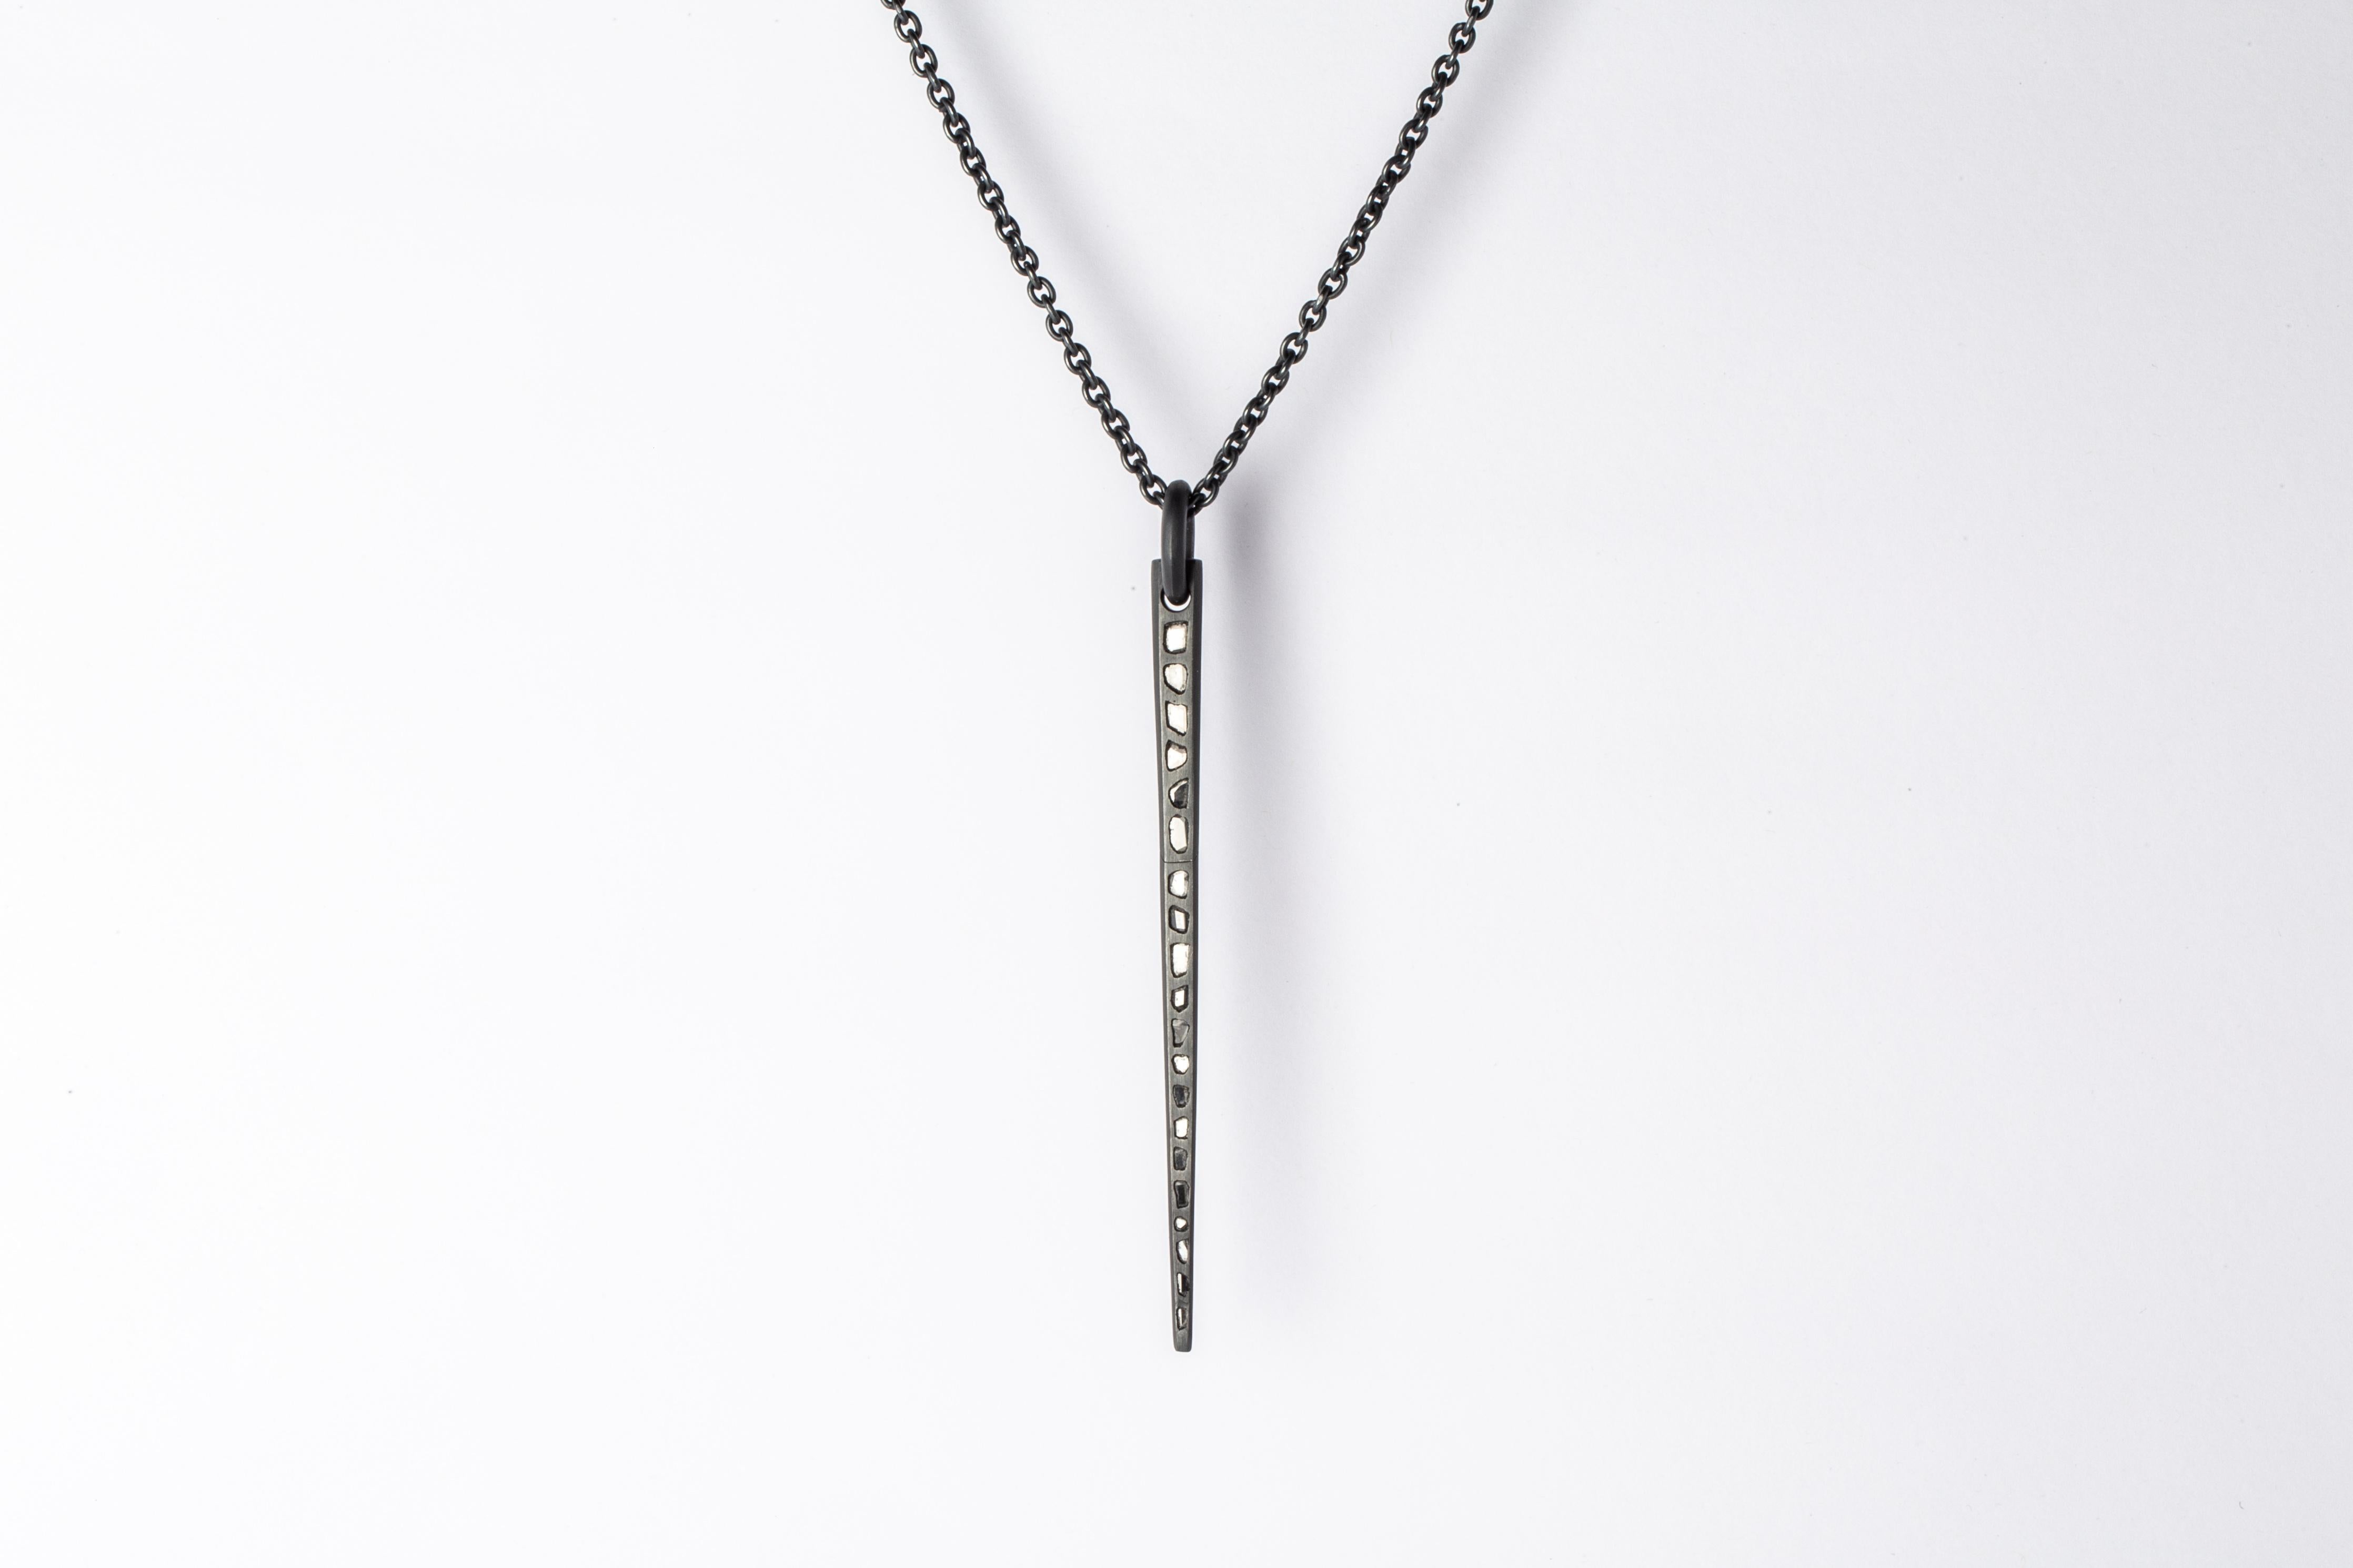 Spike necklace in oxydized sterling silver and slabs of rough diamond set in mega pave setting. It comes on a 74cm chain. These slabs are removed from a larger chunk of diamond. Each piece is unique and this is what makes it special. This finish may